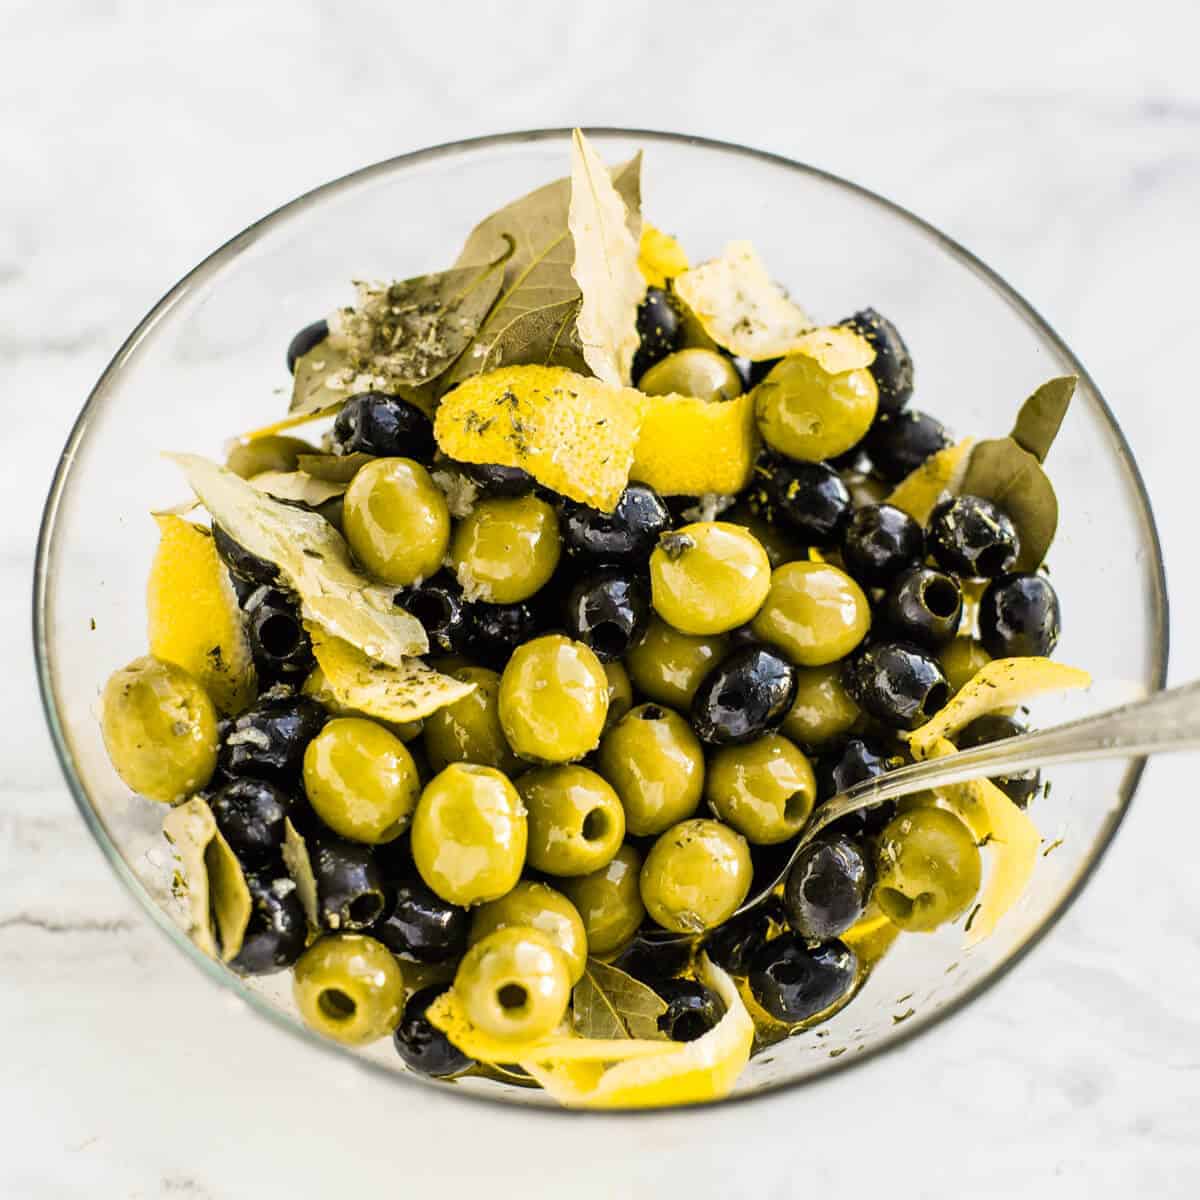 marinated black and green olives in a glass bowl